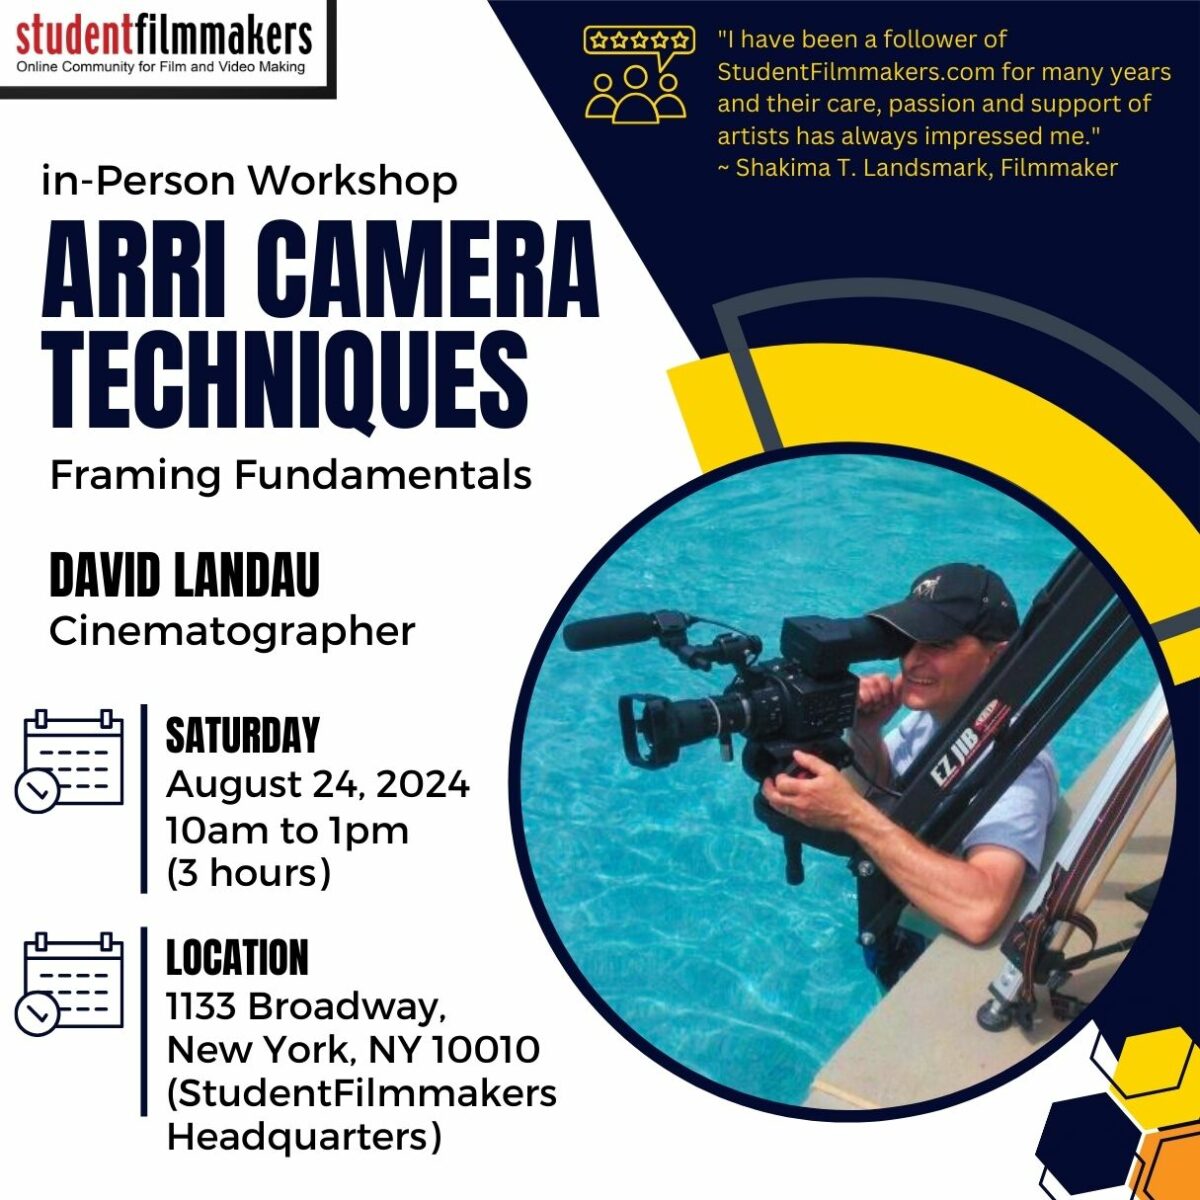 StudentFilmmakers.com In-Person Workshop - ARRI Camera Techniques: Framing Fundamentals Led by David Landau Date: Saturday, August 24, 2024 Time: 10am to 1pm Duration: 3 hours. Location: 1133 Broadway, New York, NY 10010